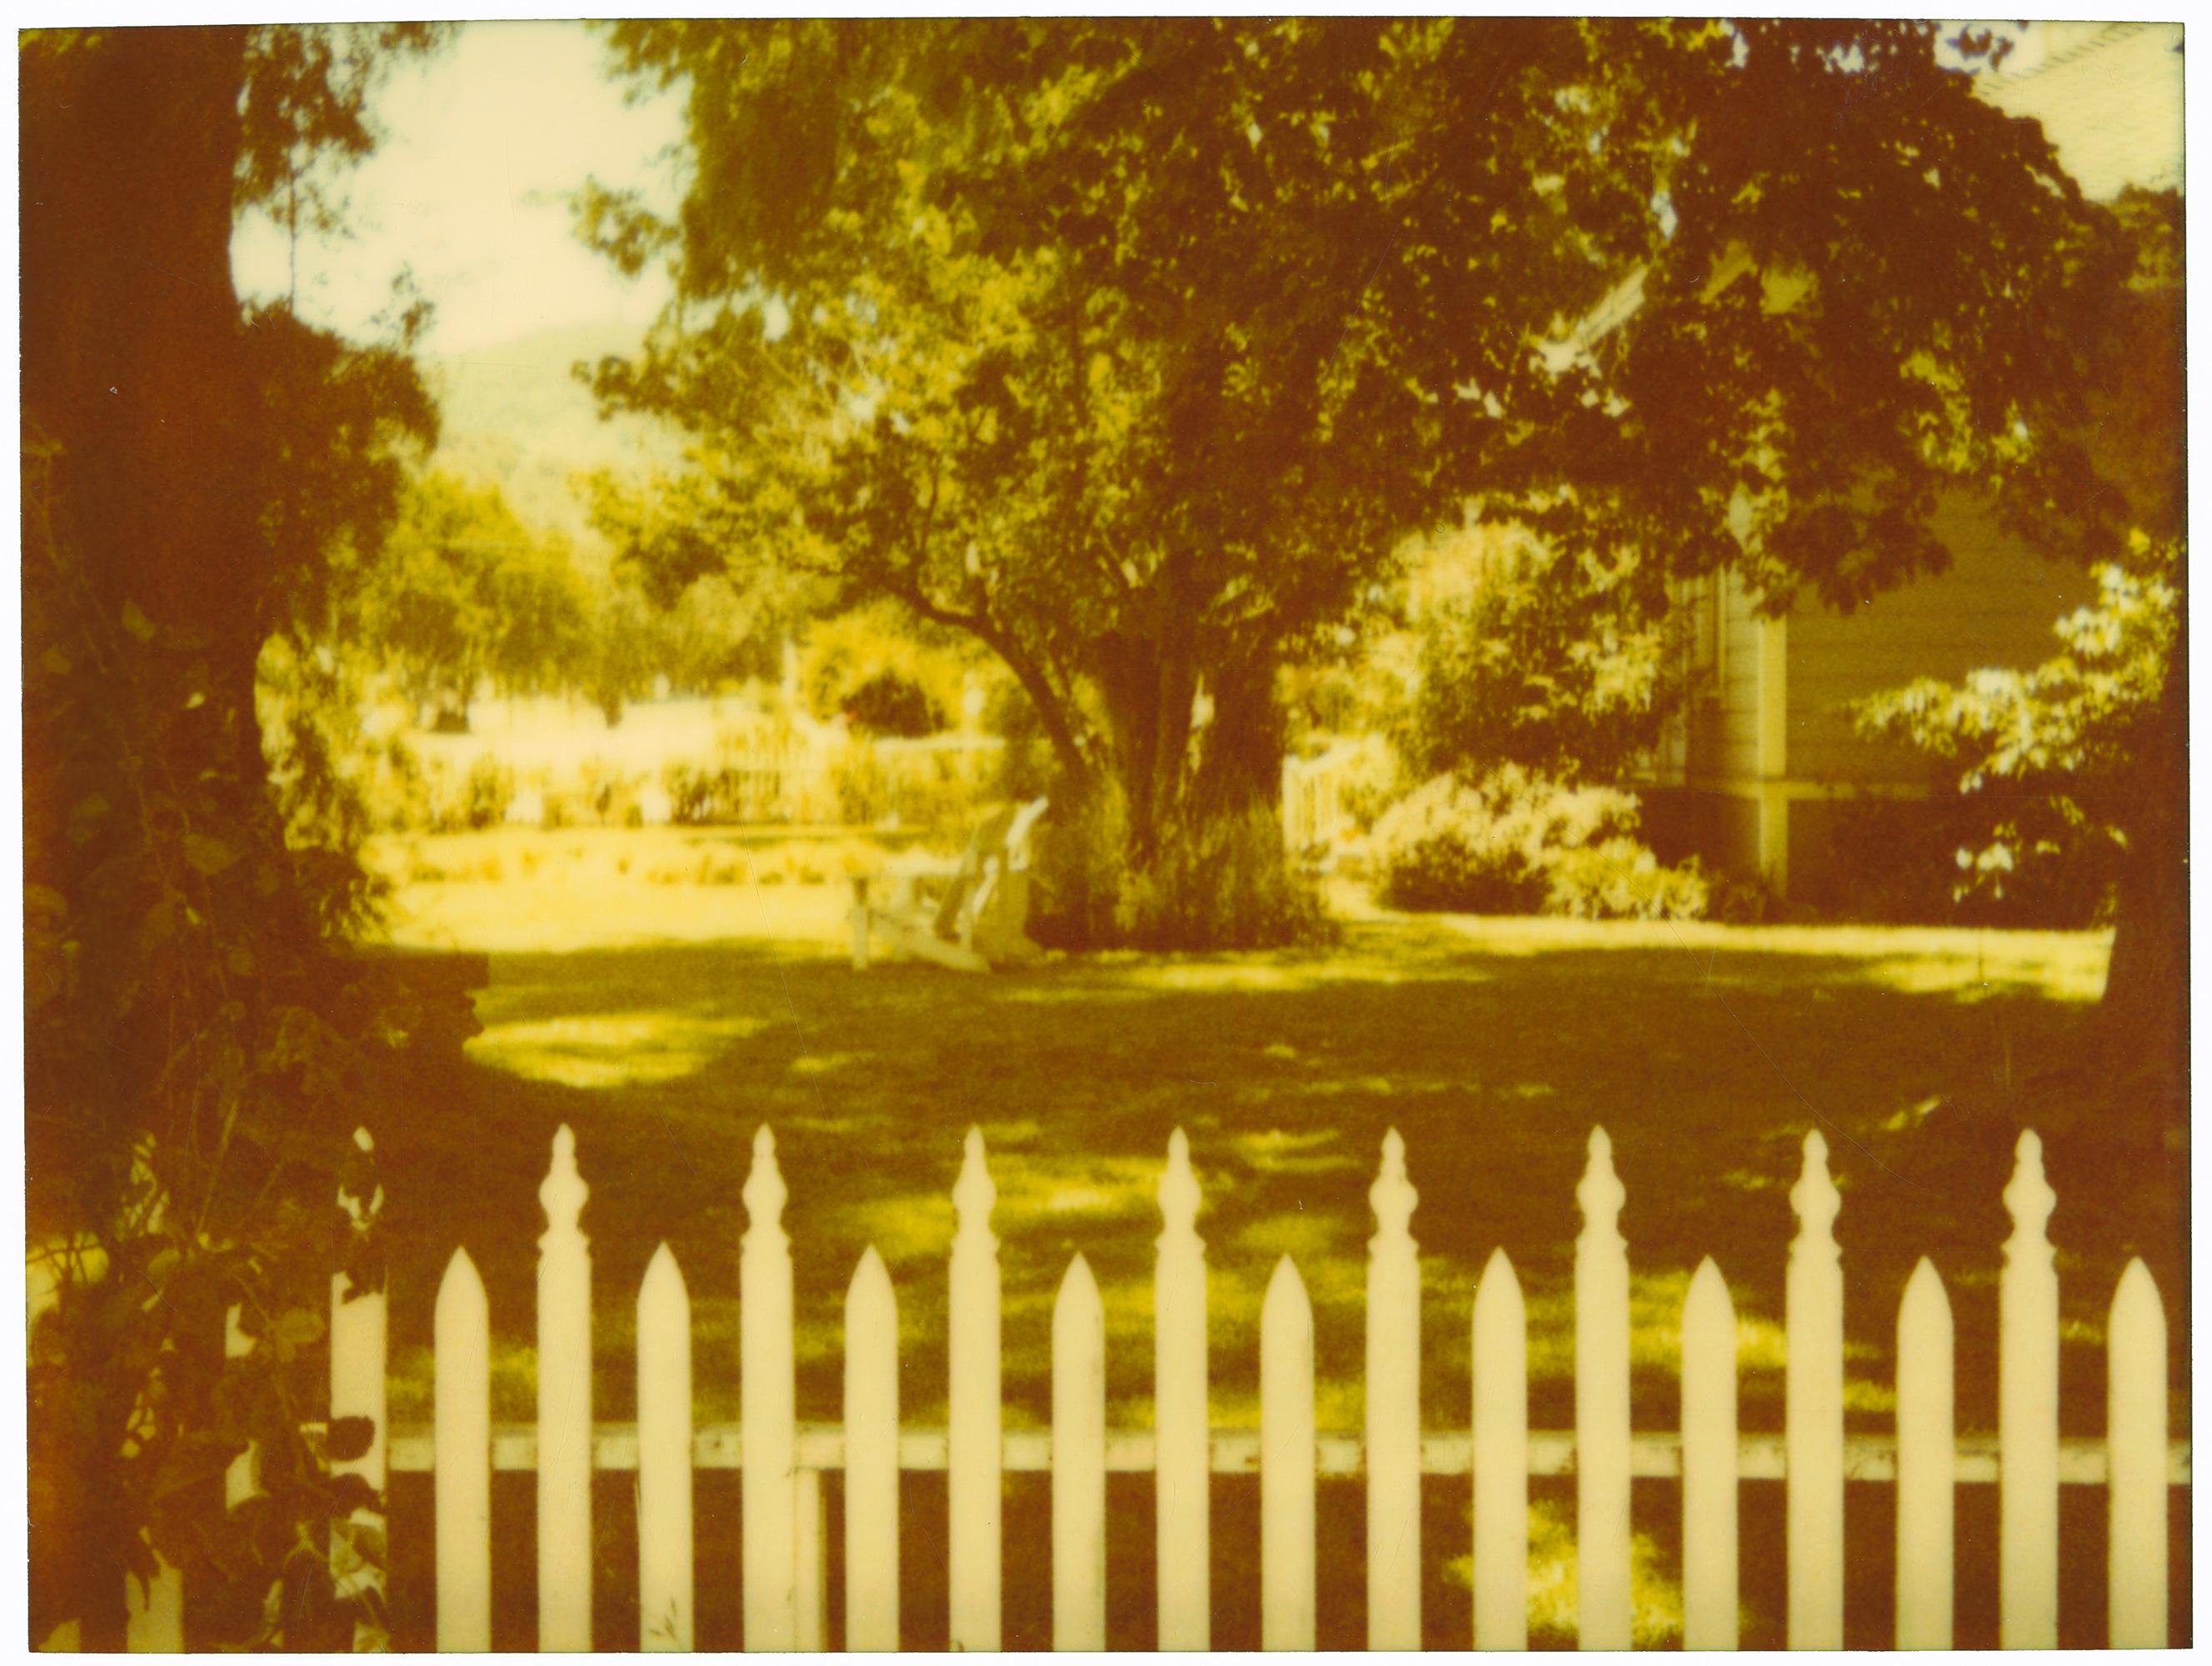 White Picket Fence (Suburbia), diptych, 2004, 
Edition of 3/5, 60x80cm each, installed 60x170cm,

Analog C-Prints, hand-printed by the artist, based on a Polaroid, 
mounted on Aluminum with matte UV-Projection, 
signed on verso, 
artist Inventory